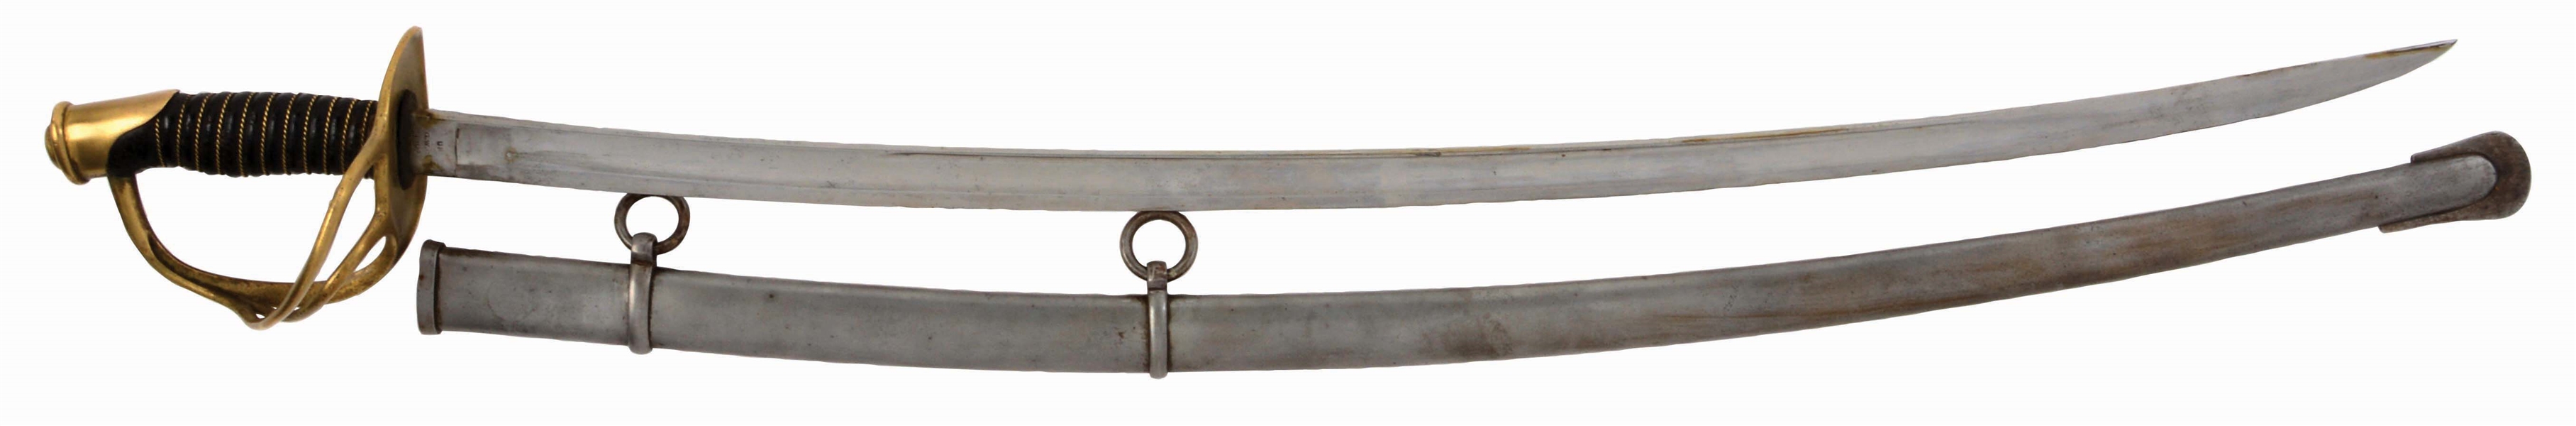 AMES PRODUCED 1860 CAVALRY SABER DATED 1864.